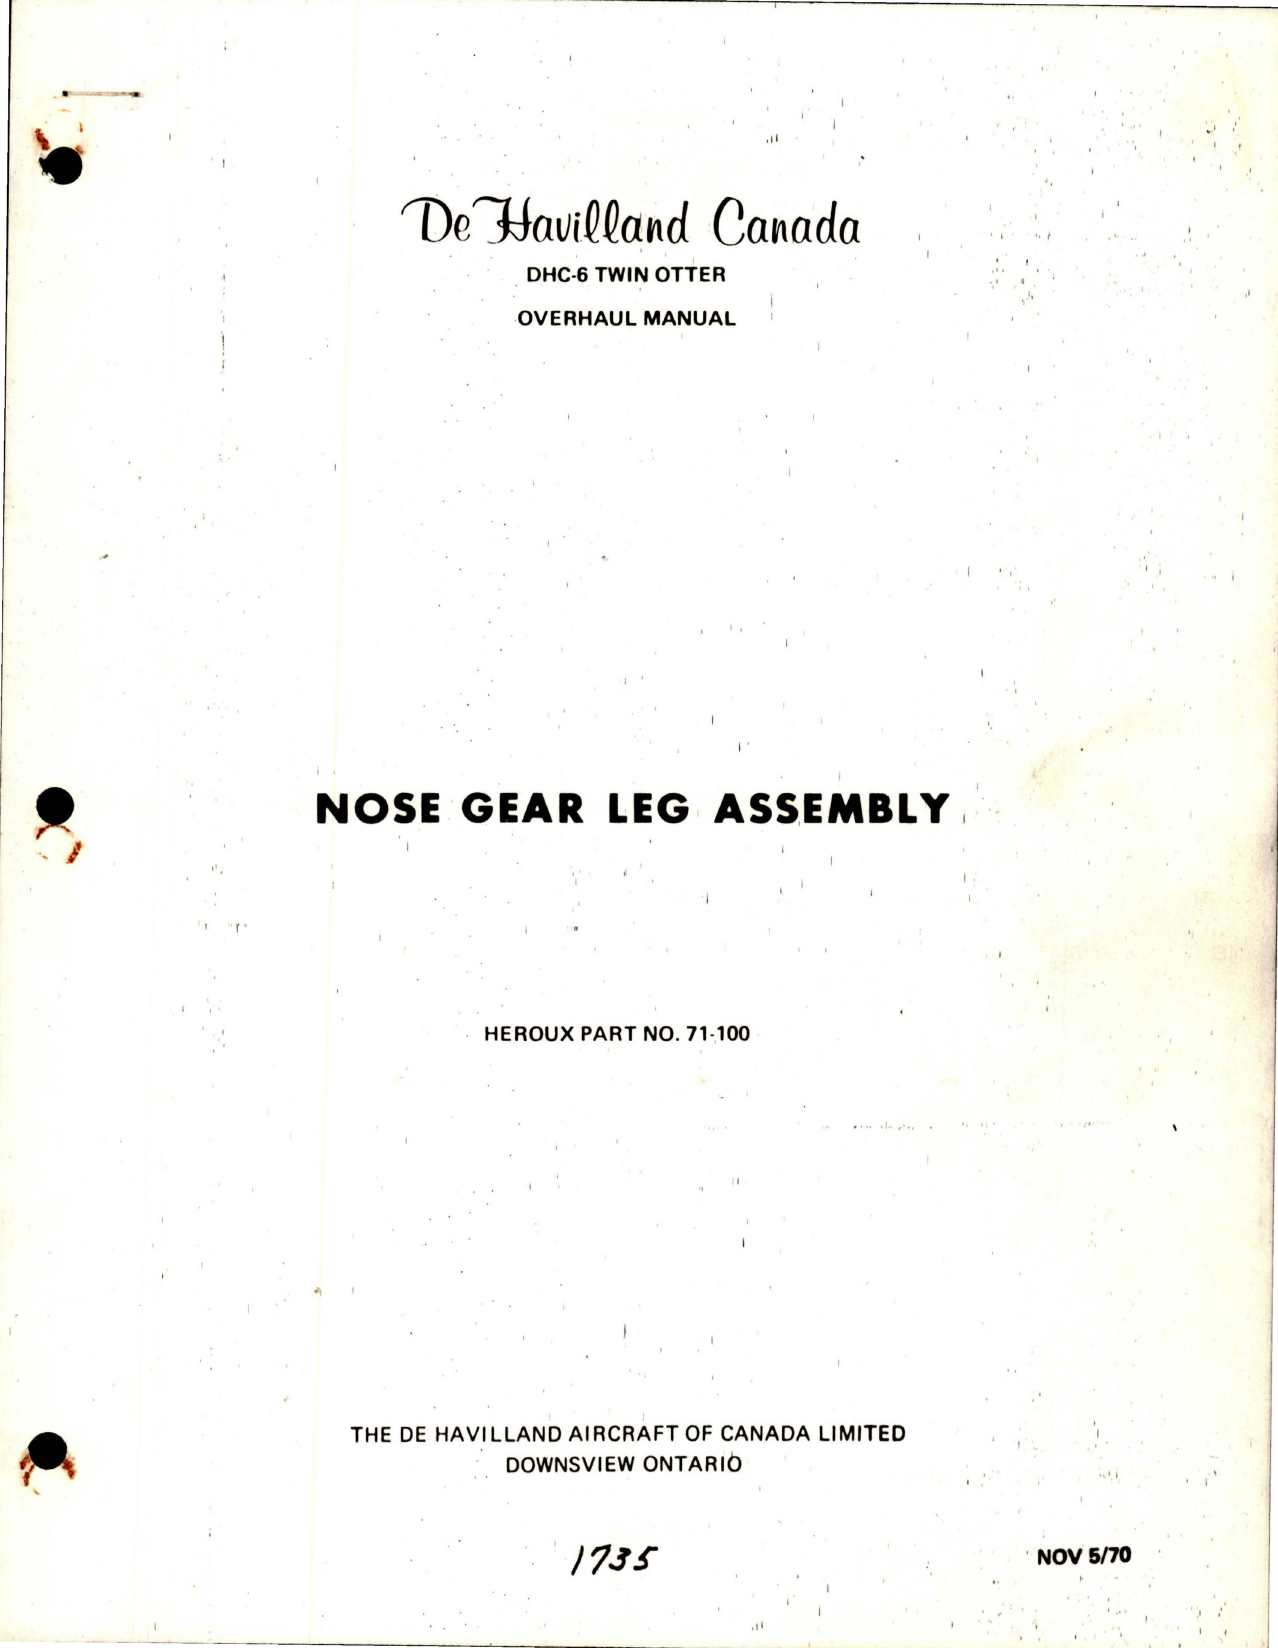 Sample page 1 from AirCorps Library document: Overhaul Manual for DHC-6 Twin Otter Nose Gear Leg Assembly - Part 71-100 